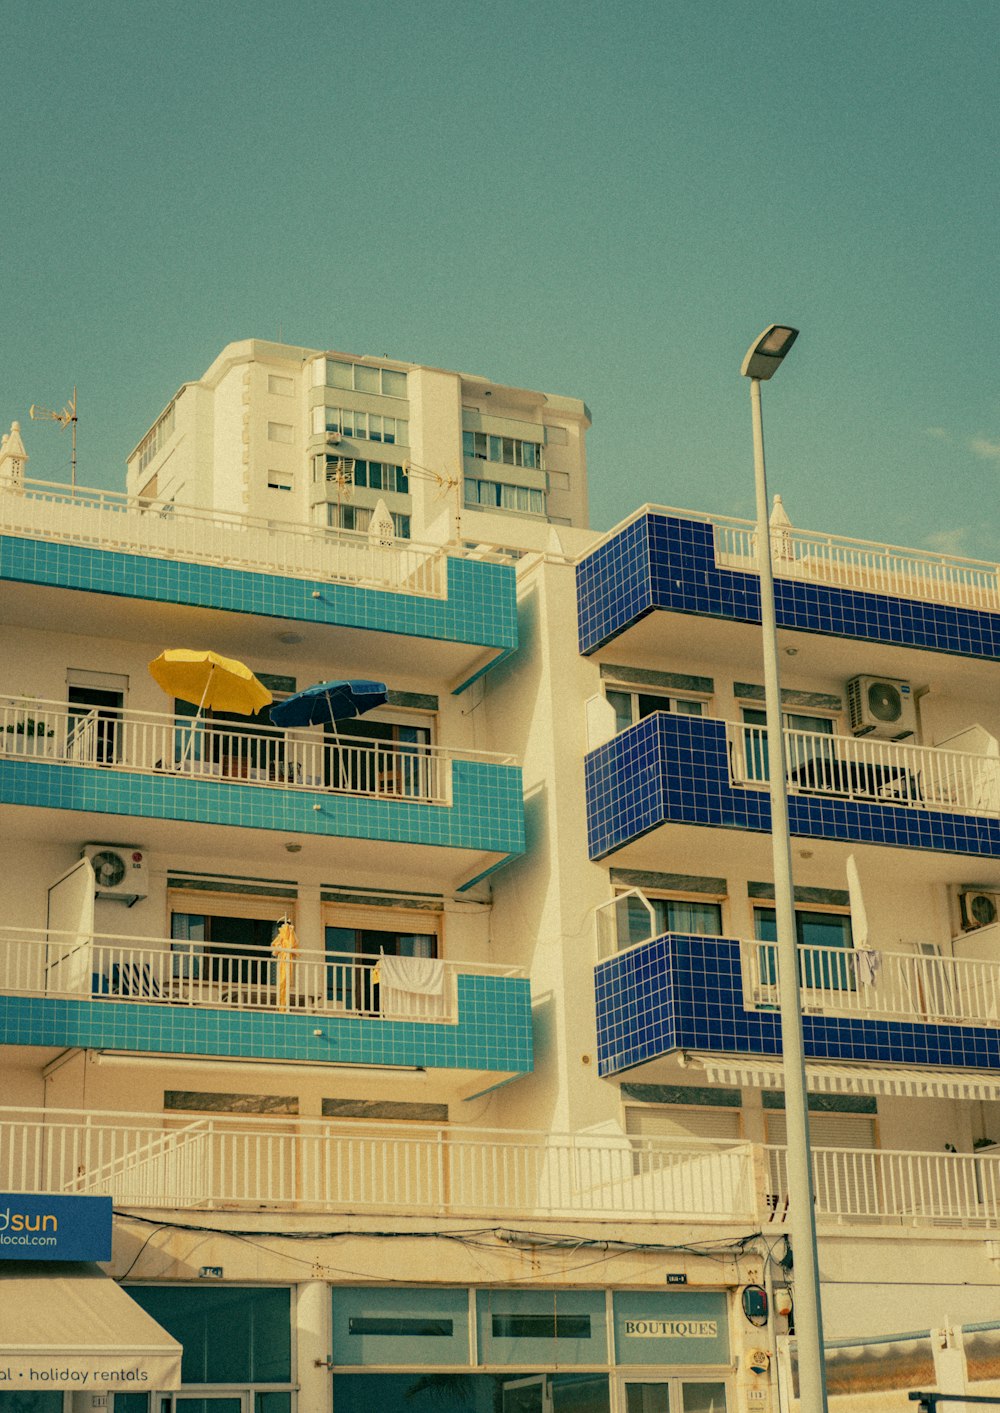 a blue and white building with balconies and a yellow umbrella